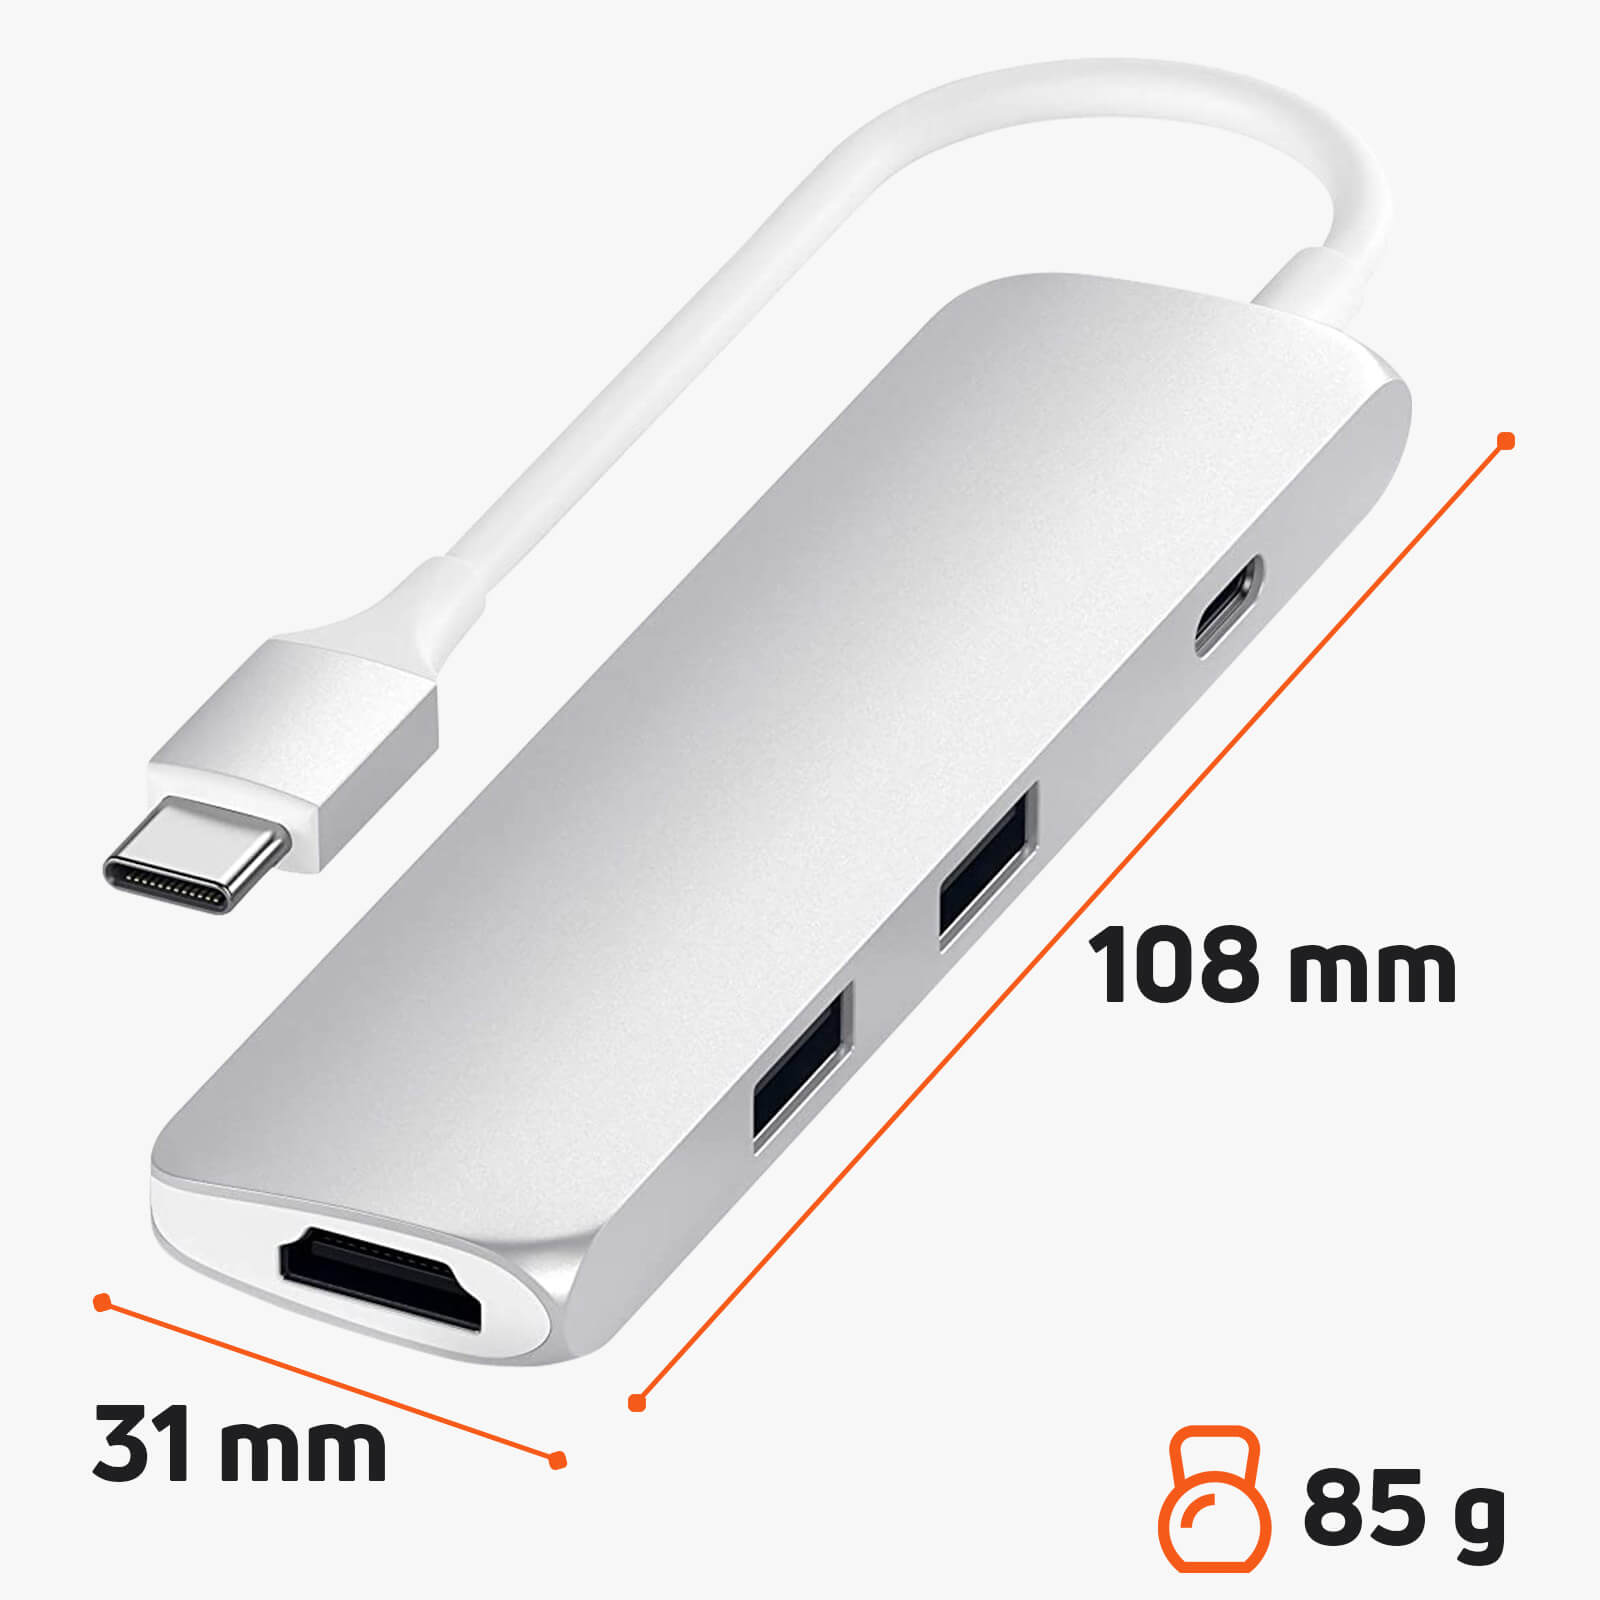 SATECHI - HUB USB-C MULTIPORTS ON-THE-GO GRIS